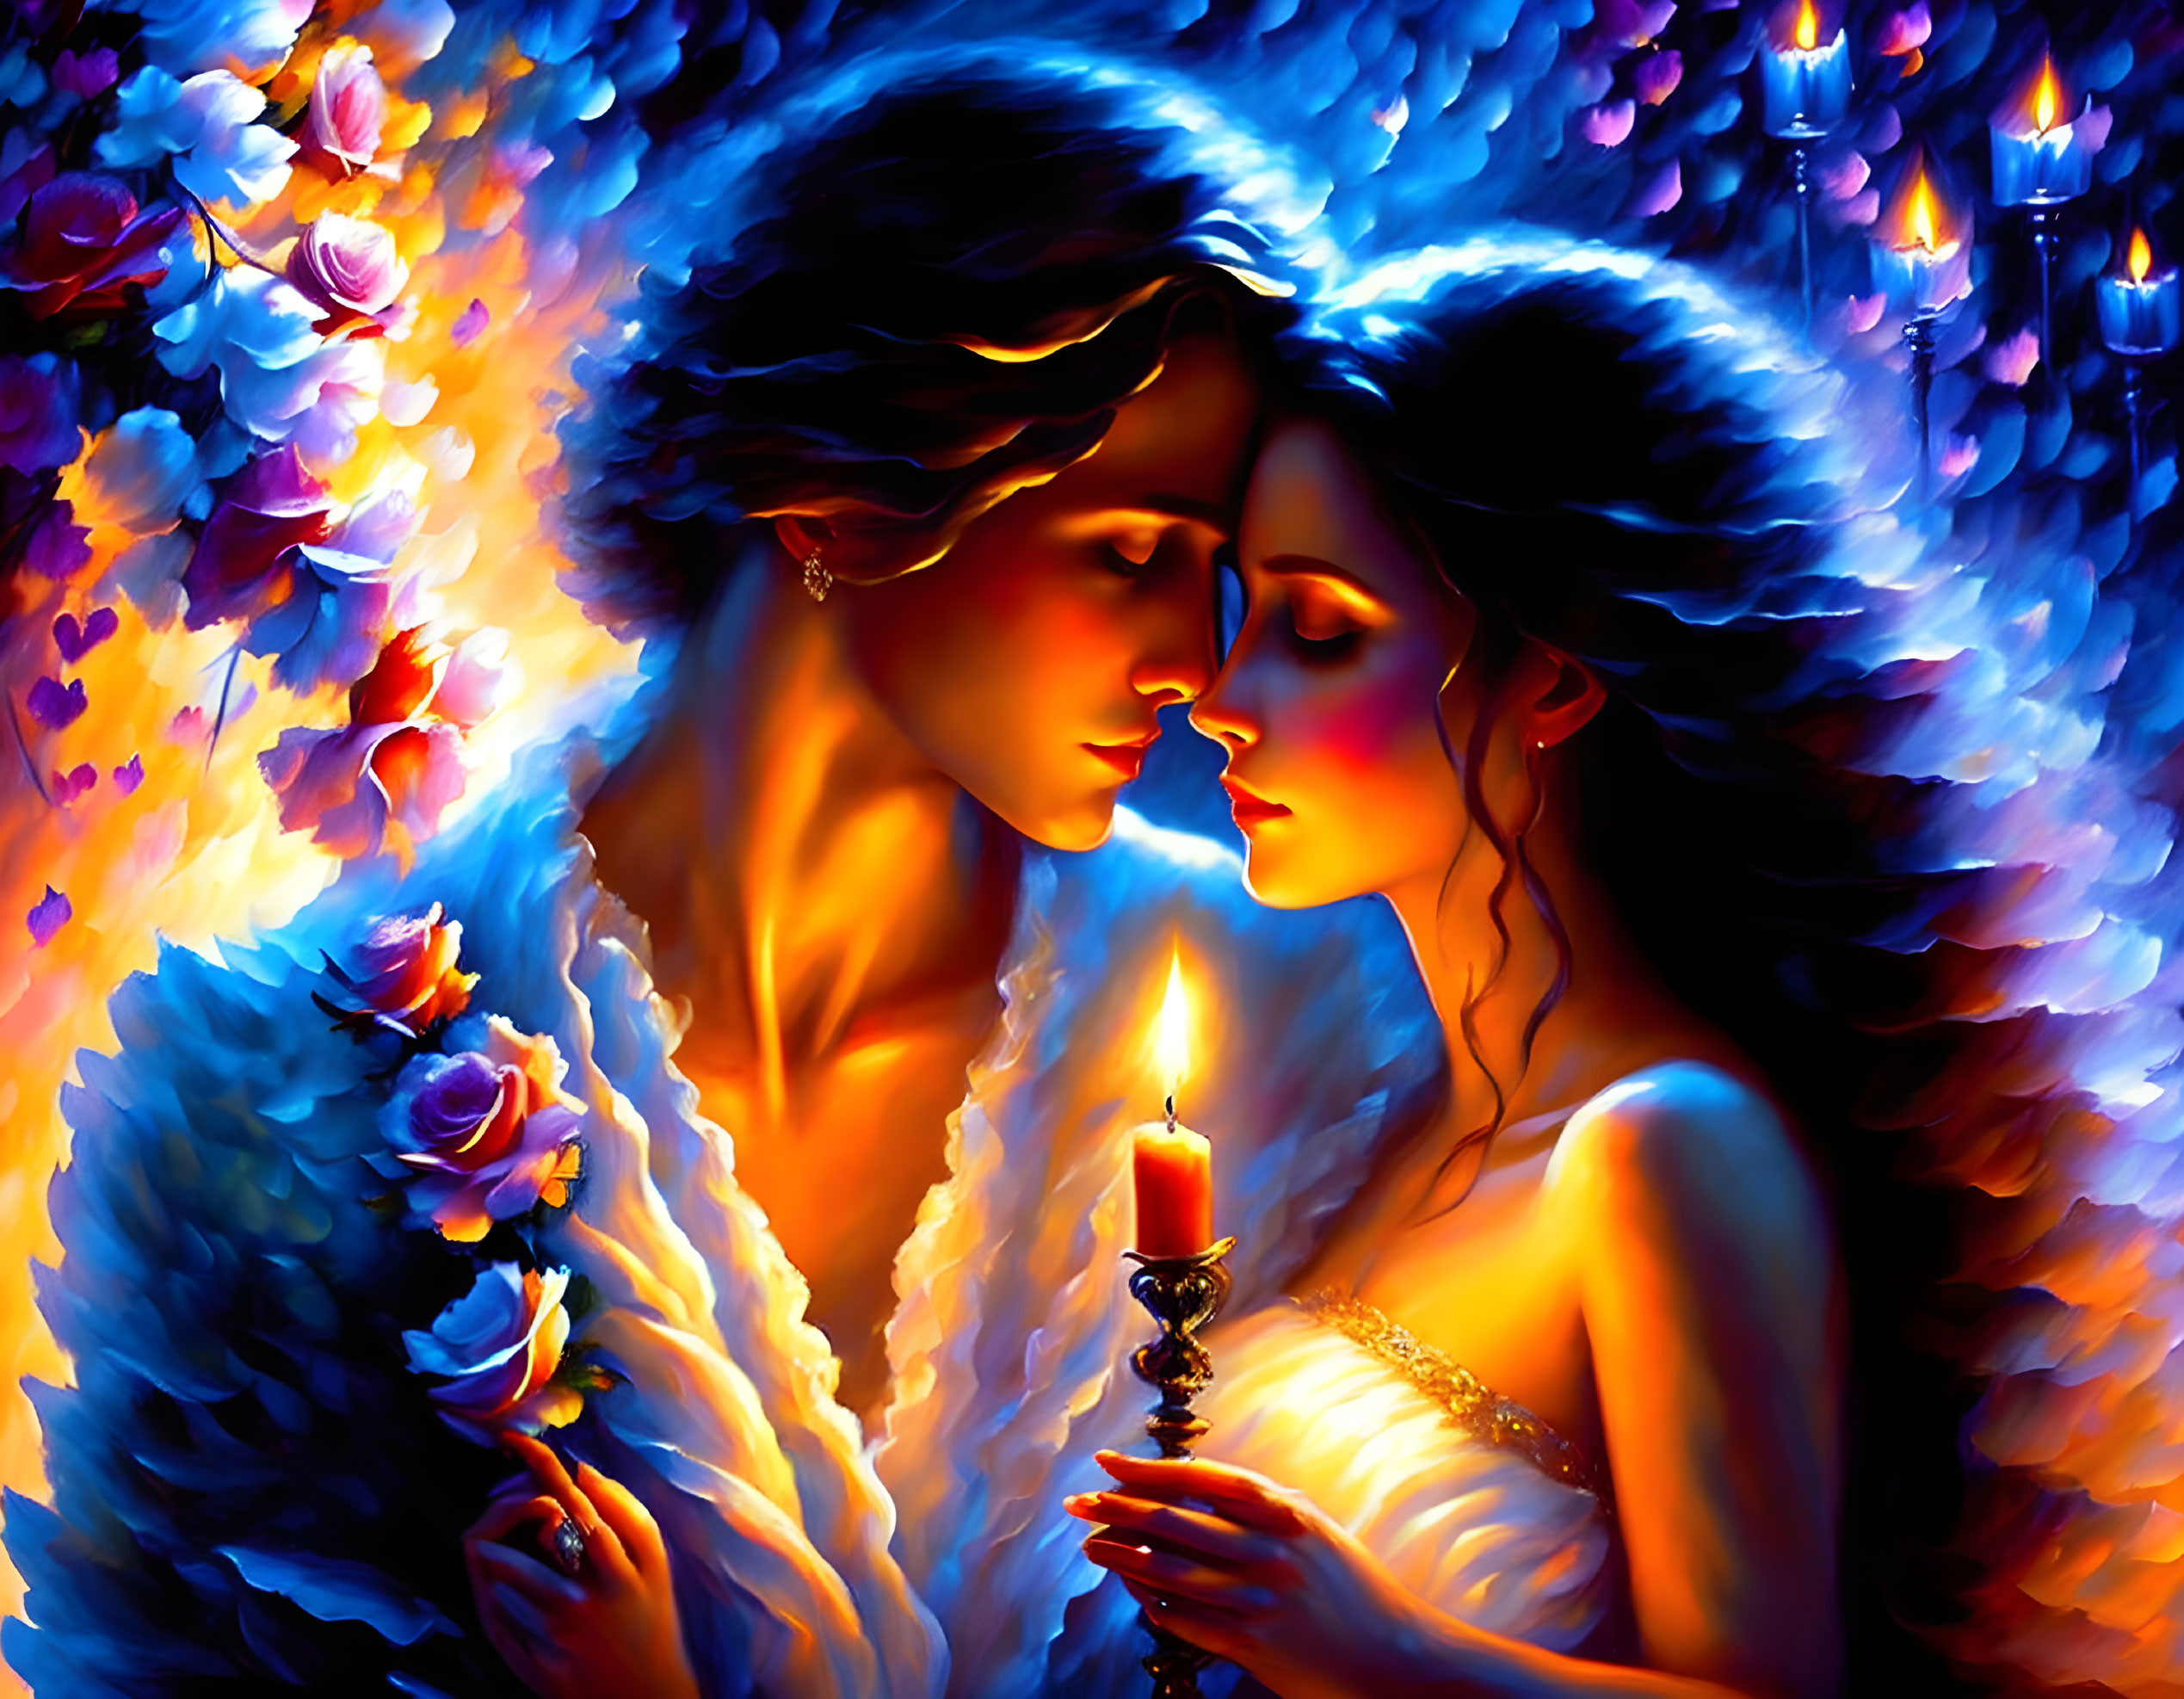 Romantic couple surrounded by roses and candlelight